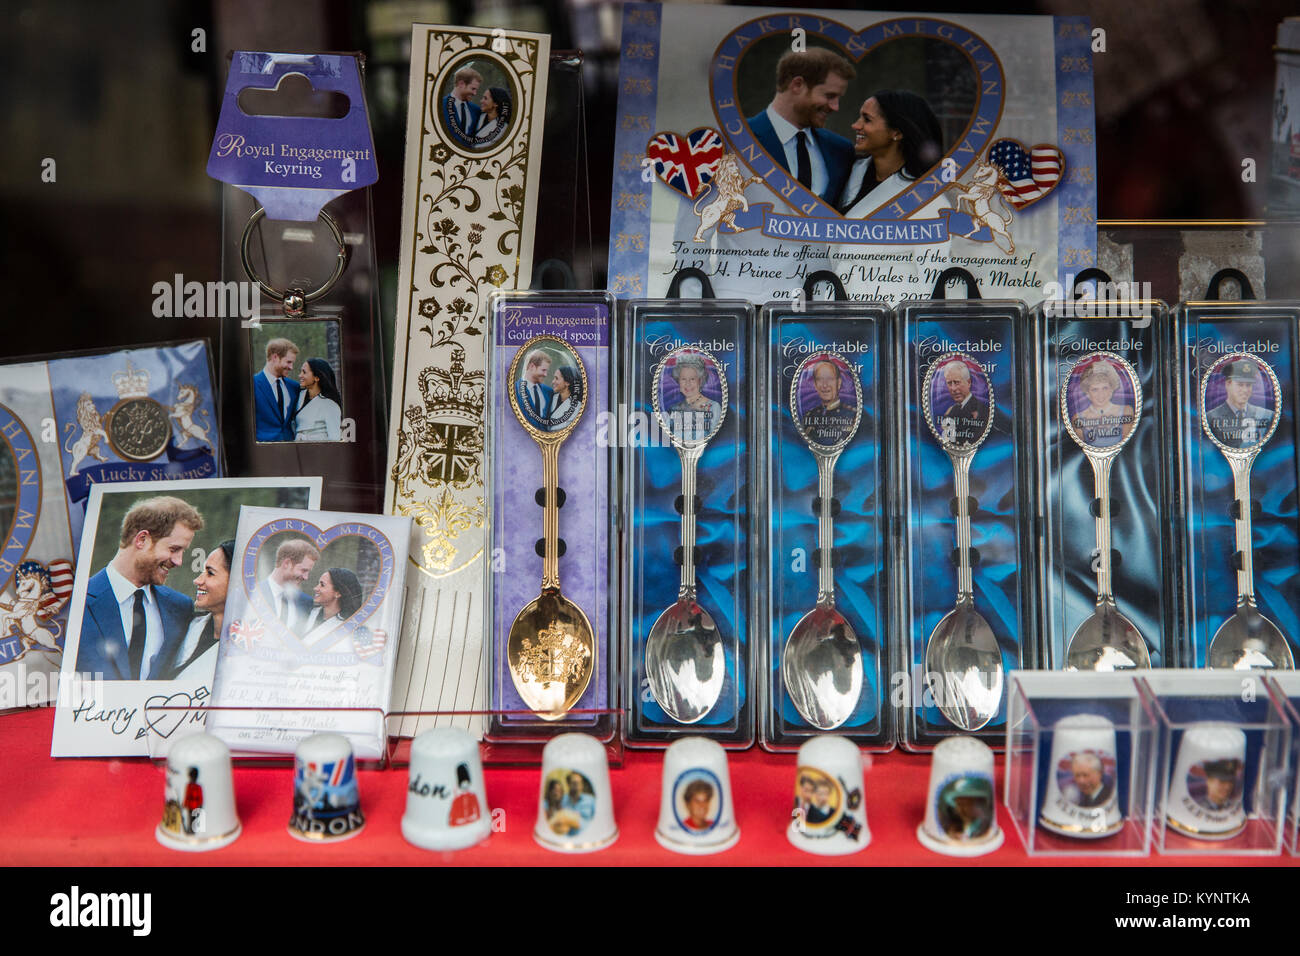 Windsor, UK. 15th Jan, 2018. Mugs, spoons and other mementos featuring images of Prince Harry and Meghan Markle have begun to appear in souvenir and gift shops around Windsor ahead of the royal wedding at St George's Chapel, Windsor Castle, in May. Credit: Mark Kerrison/Alamy Live News Stock Photo